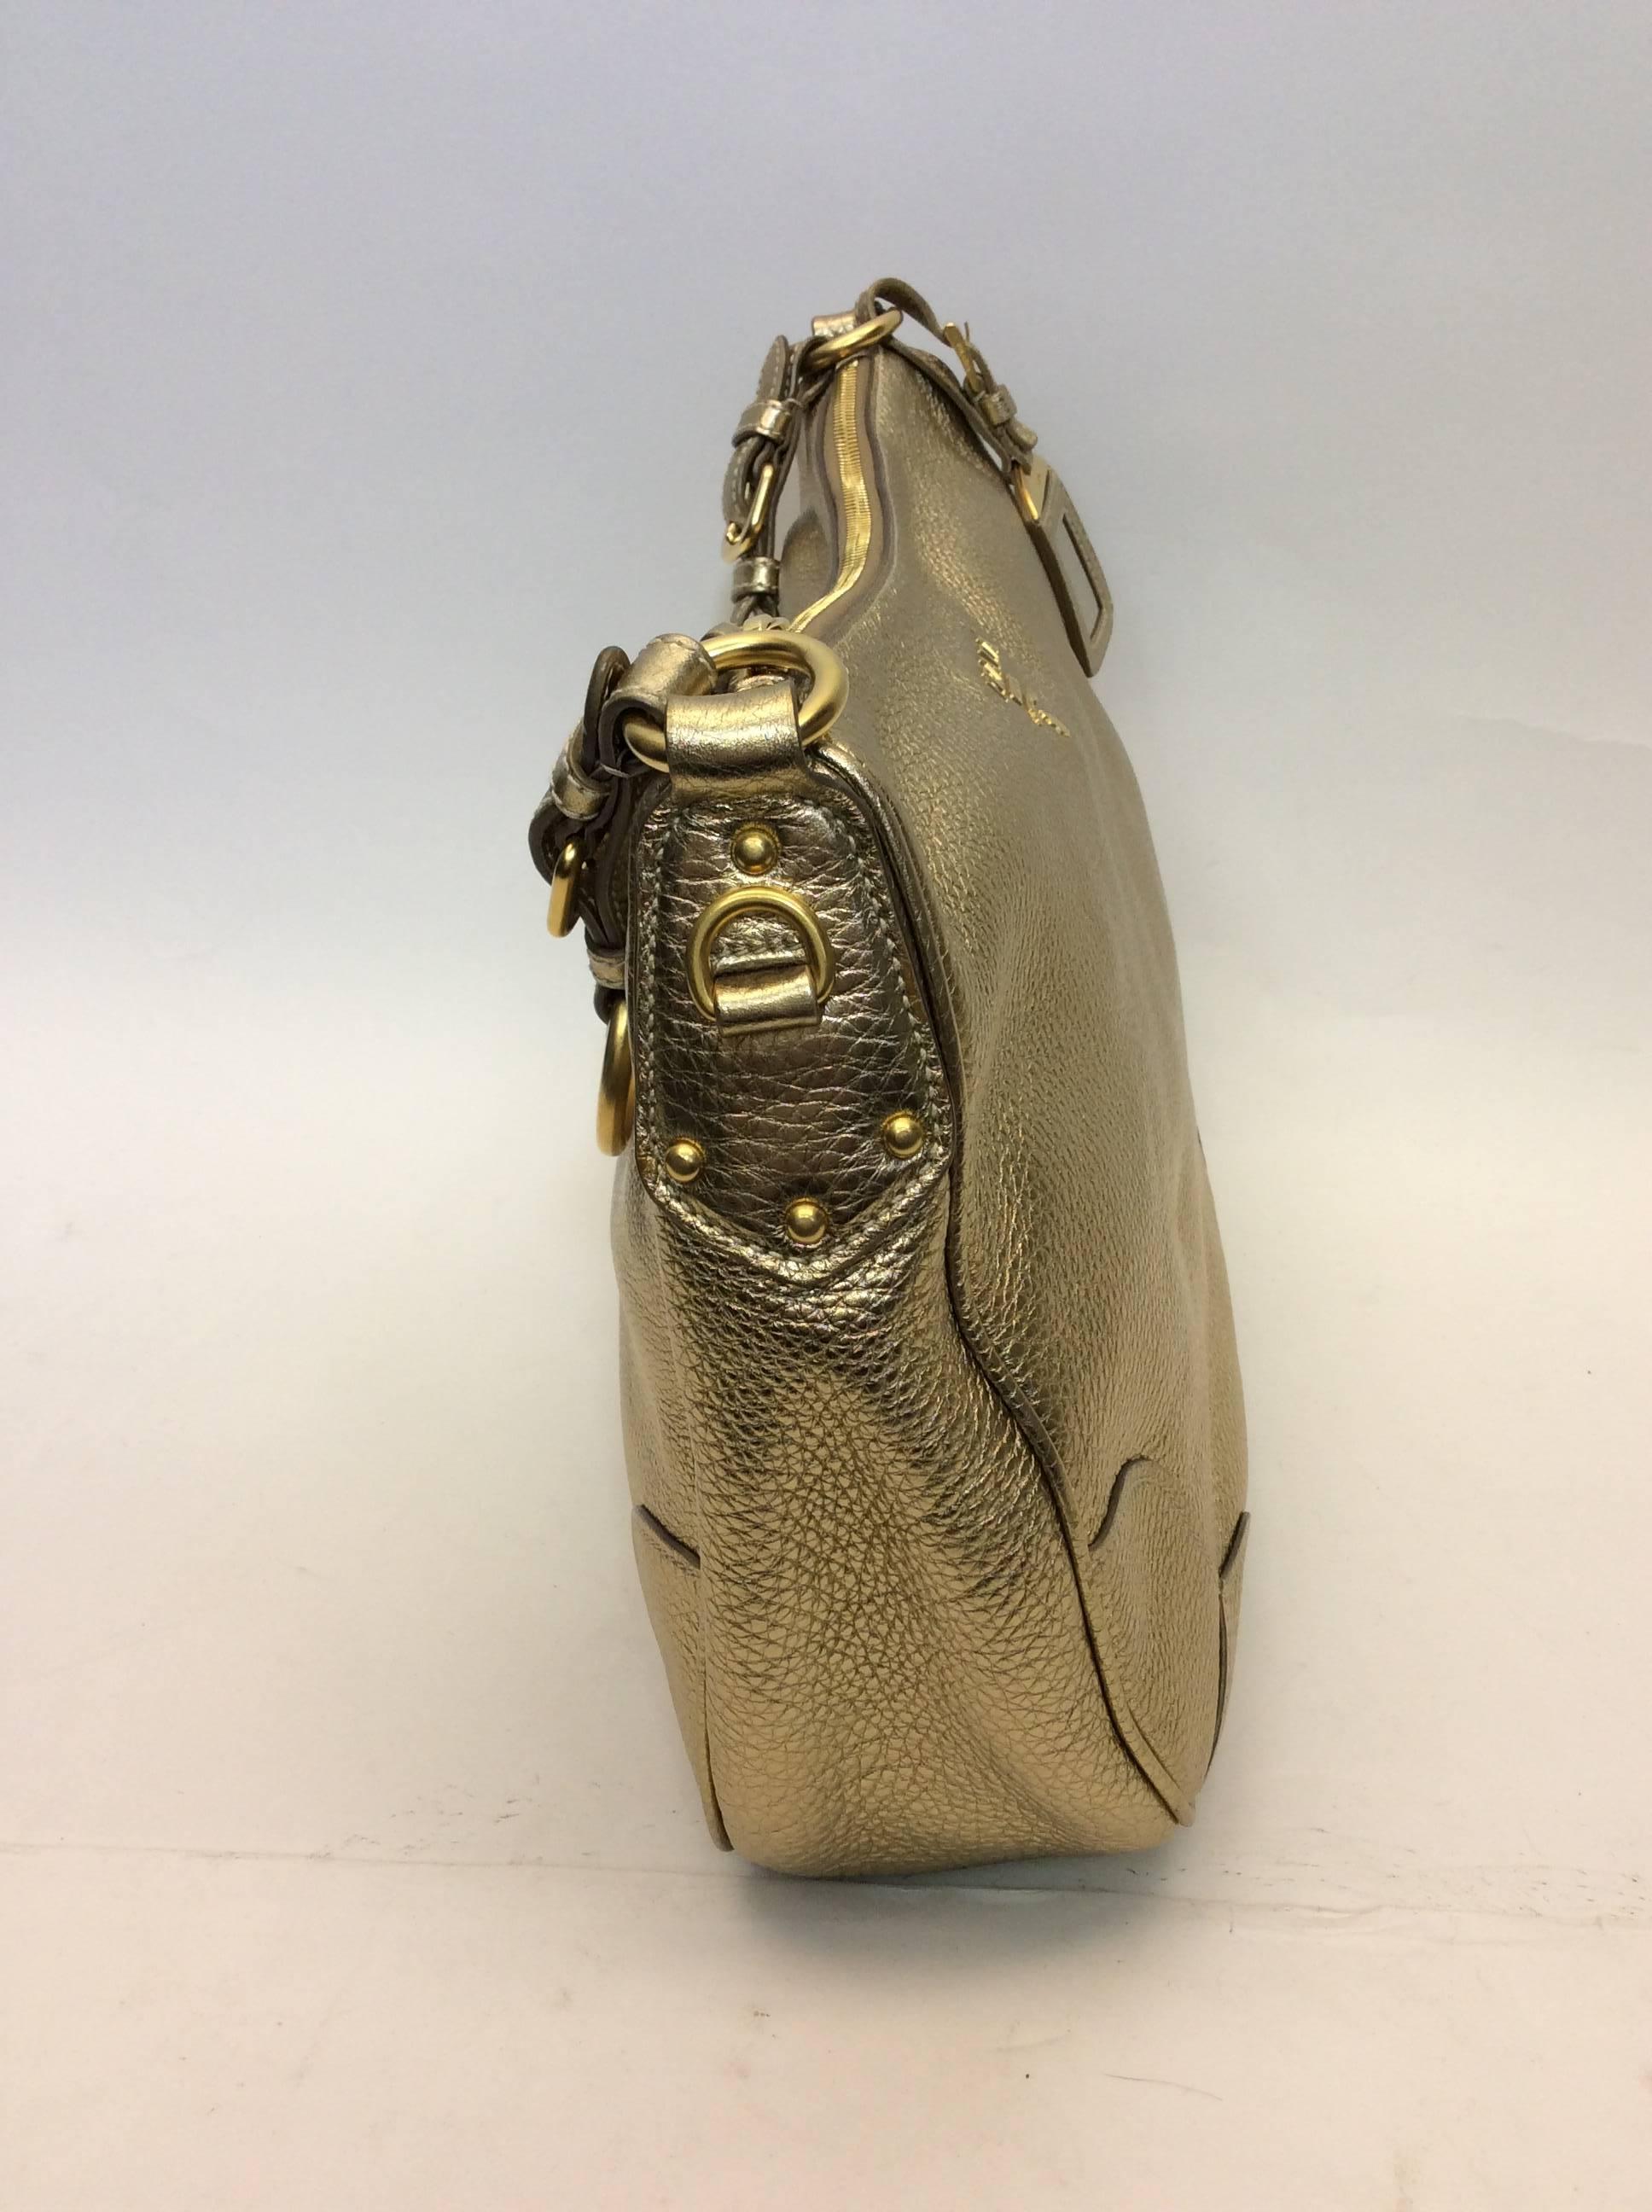 Gold Leather Hobo Bag
15 inches wide, 11 inches tall and 4 inches deep
7 inch strap drop
Includes gold buckled Prada fob
Zipper top closure
Features one zipped and one open interior pocket
Leather exterior with woven lining
